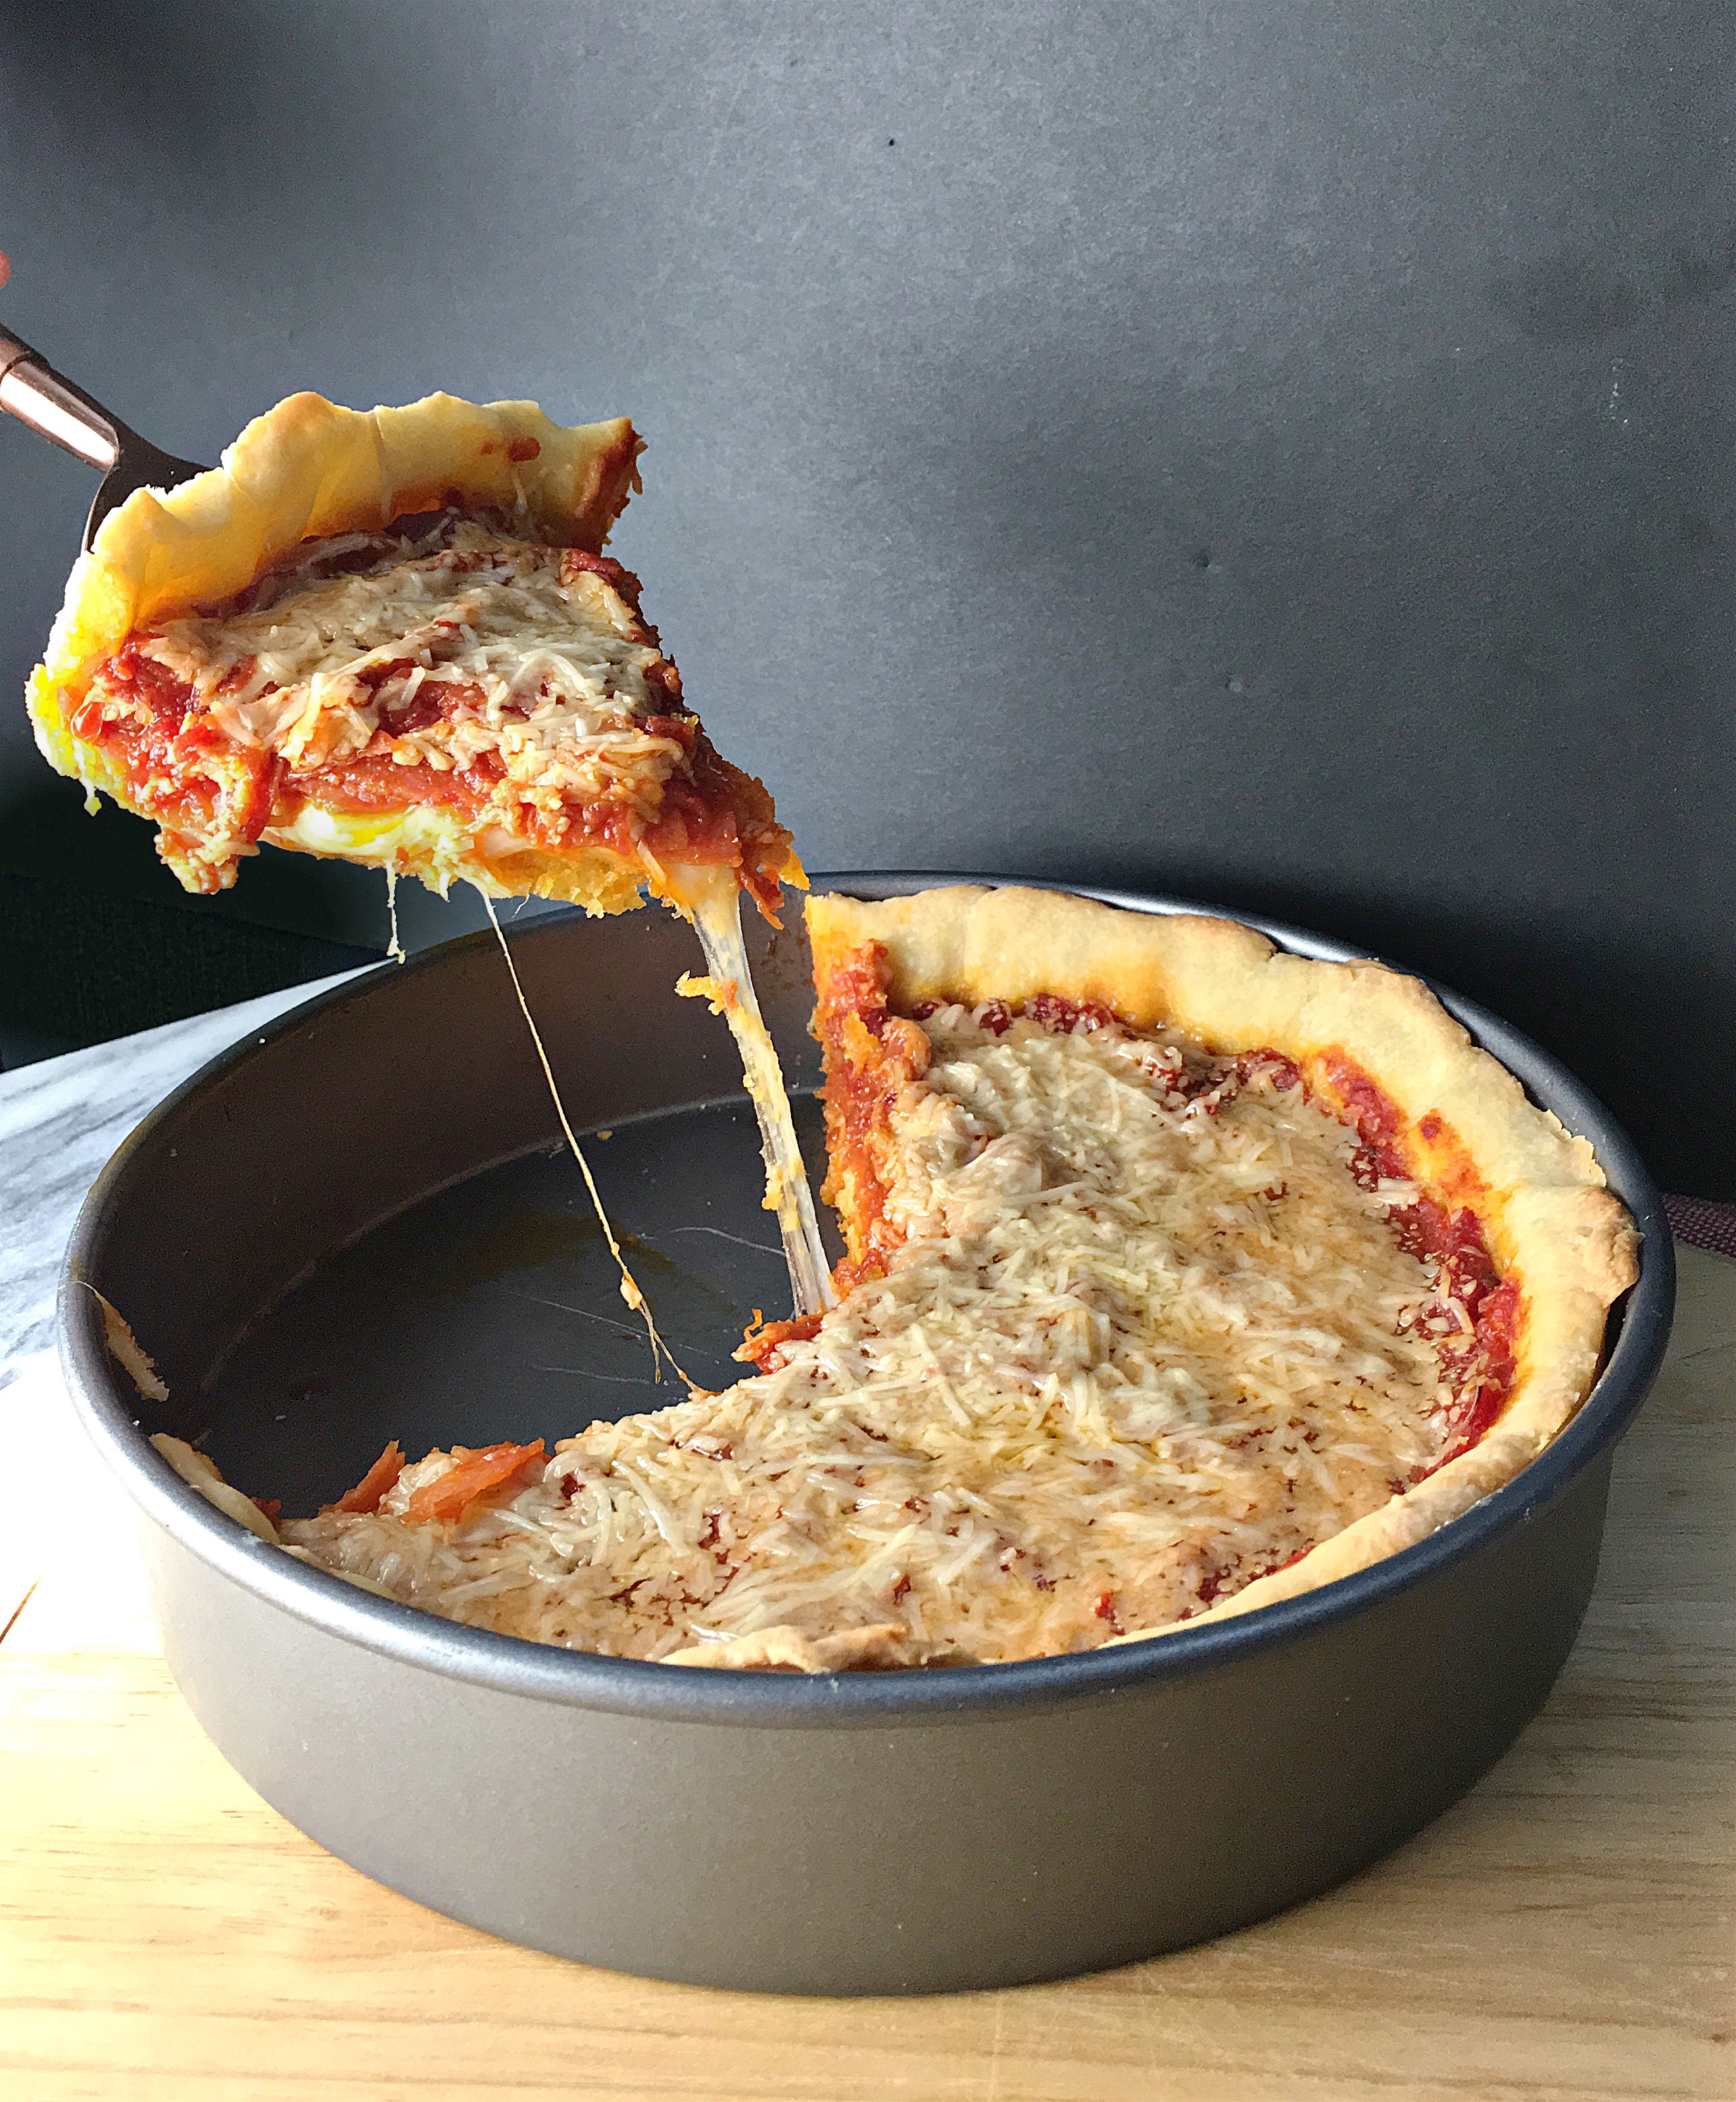 I just received a springform pan as a wedding gift so I made Chicago style deep  dish pizza! : r/Baking